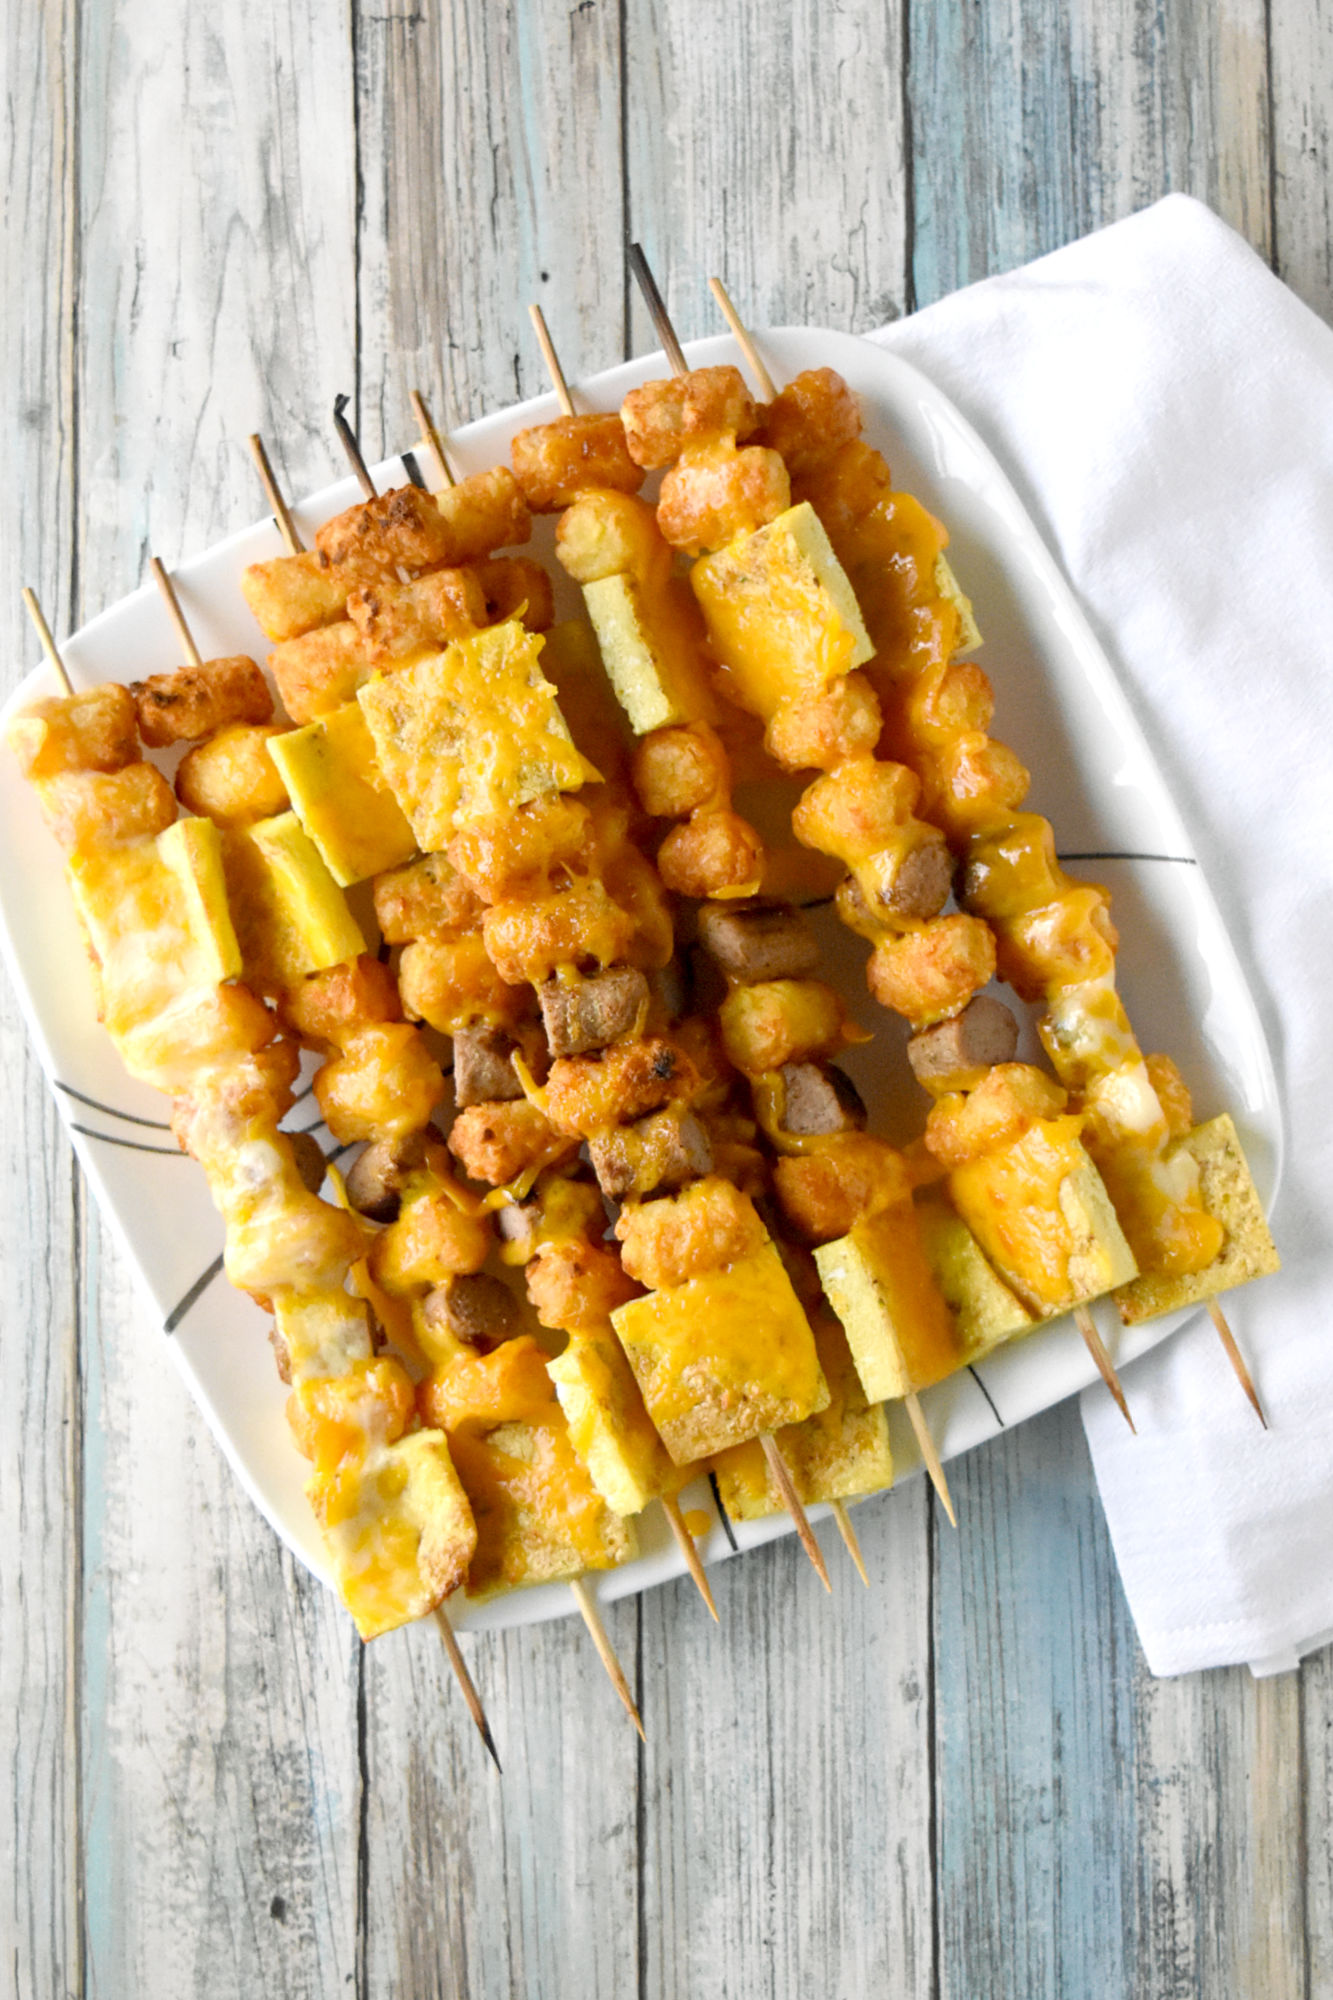 Breakfast Totcho Kabobs are fun and quick! The eggs and sausage bake while the tots air fry making these super easy to make. 